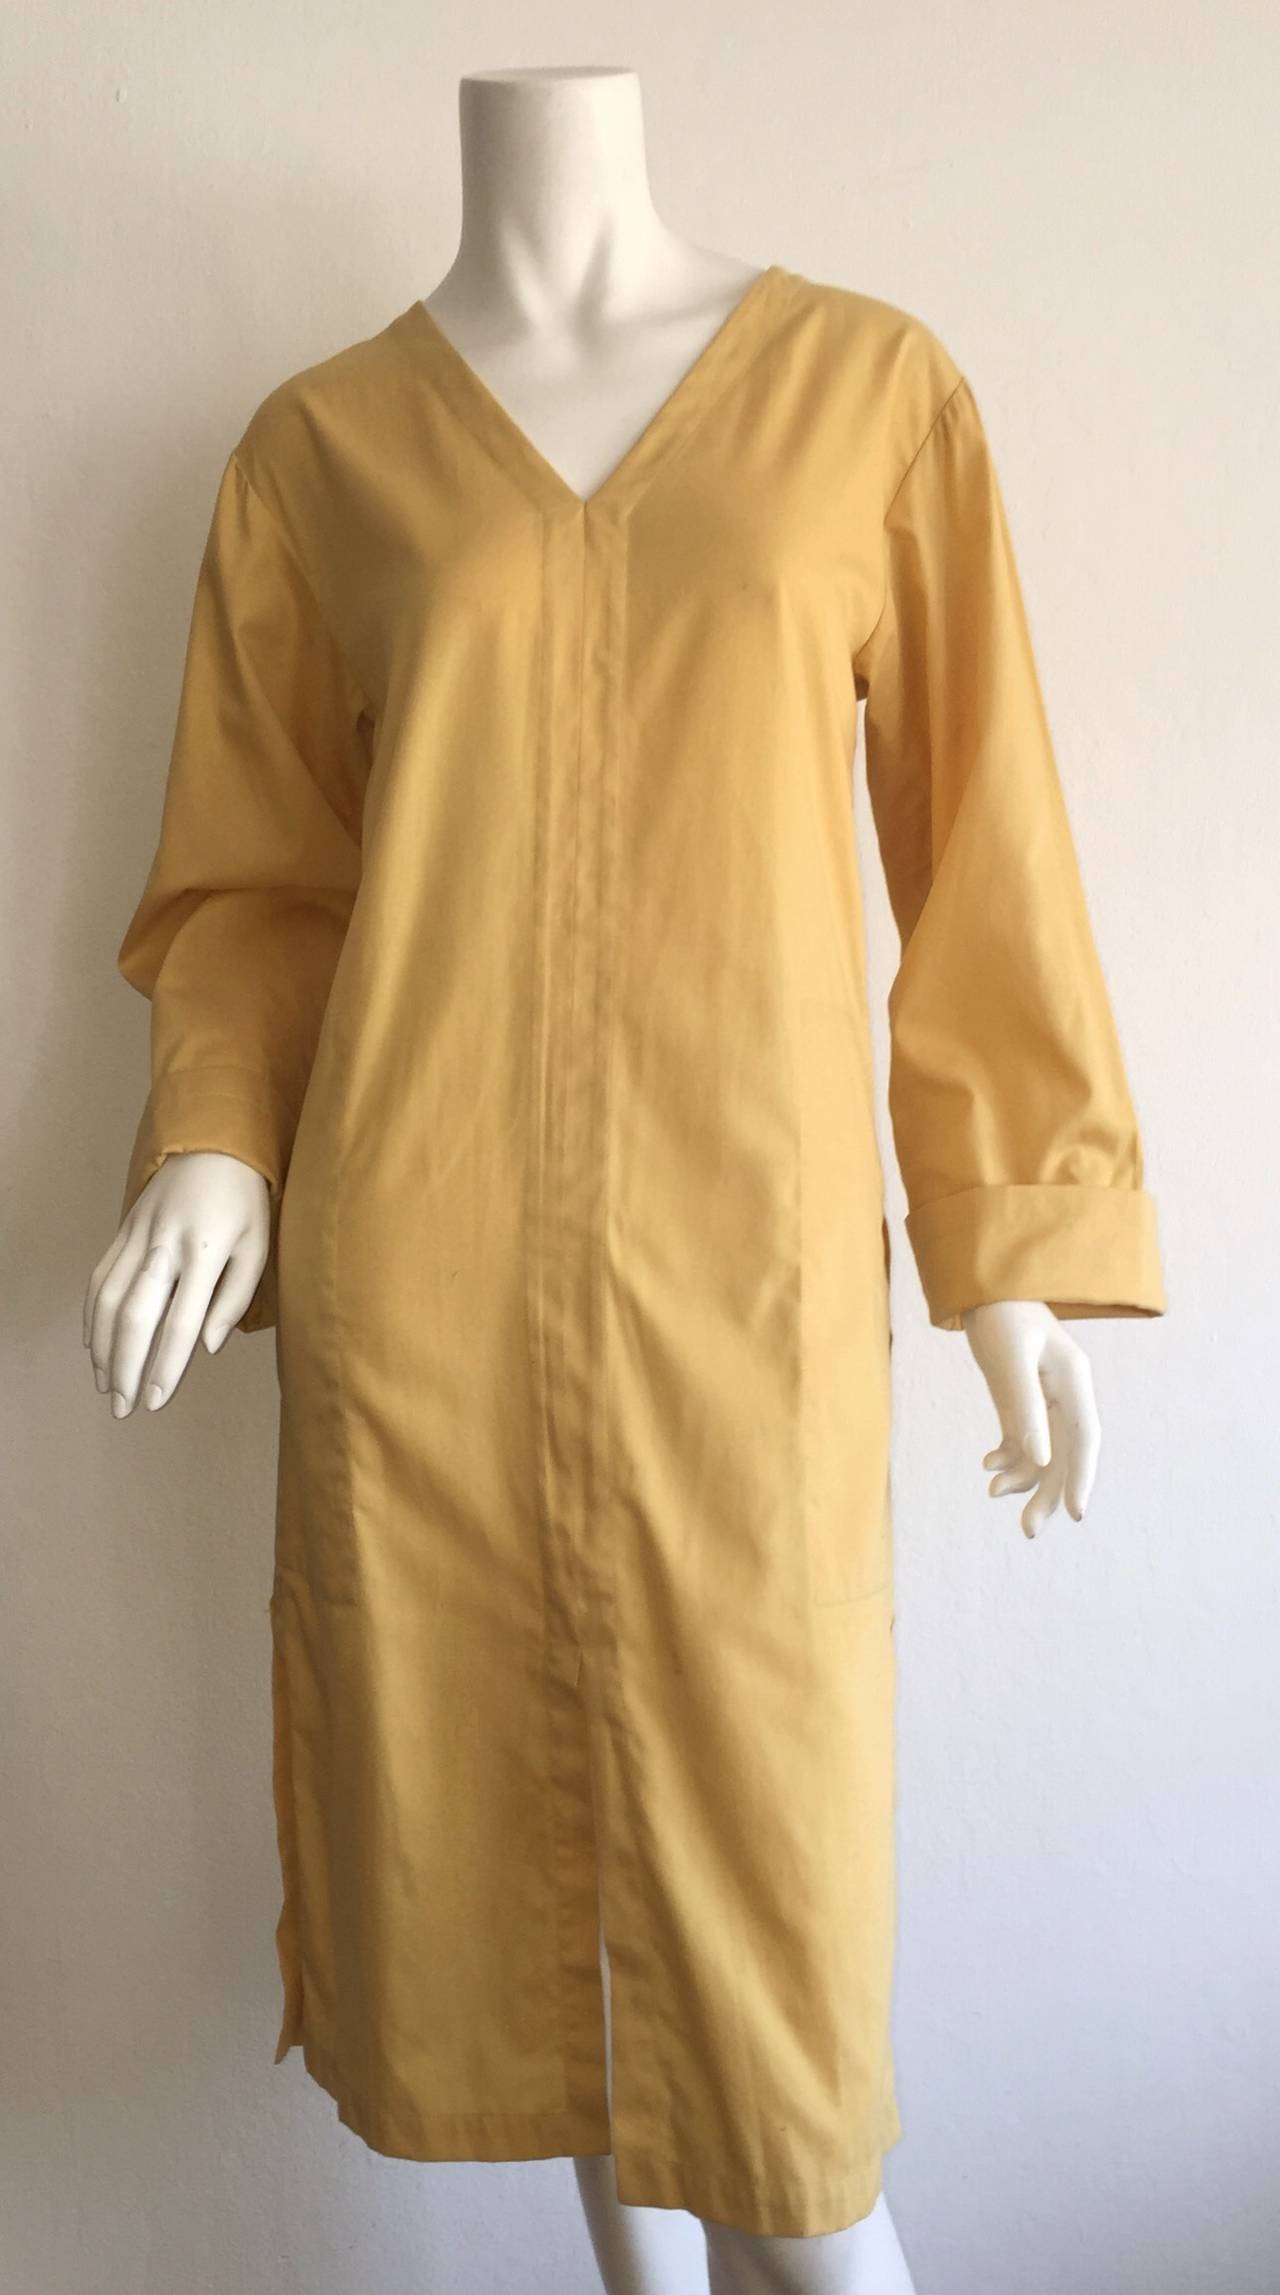 Vintage Yves Saint Laurent ' Rive Gauche ' Yellow Cotton Tunic Dress YSL In Excellent Condition For Sale In San Diego, CA